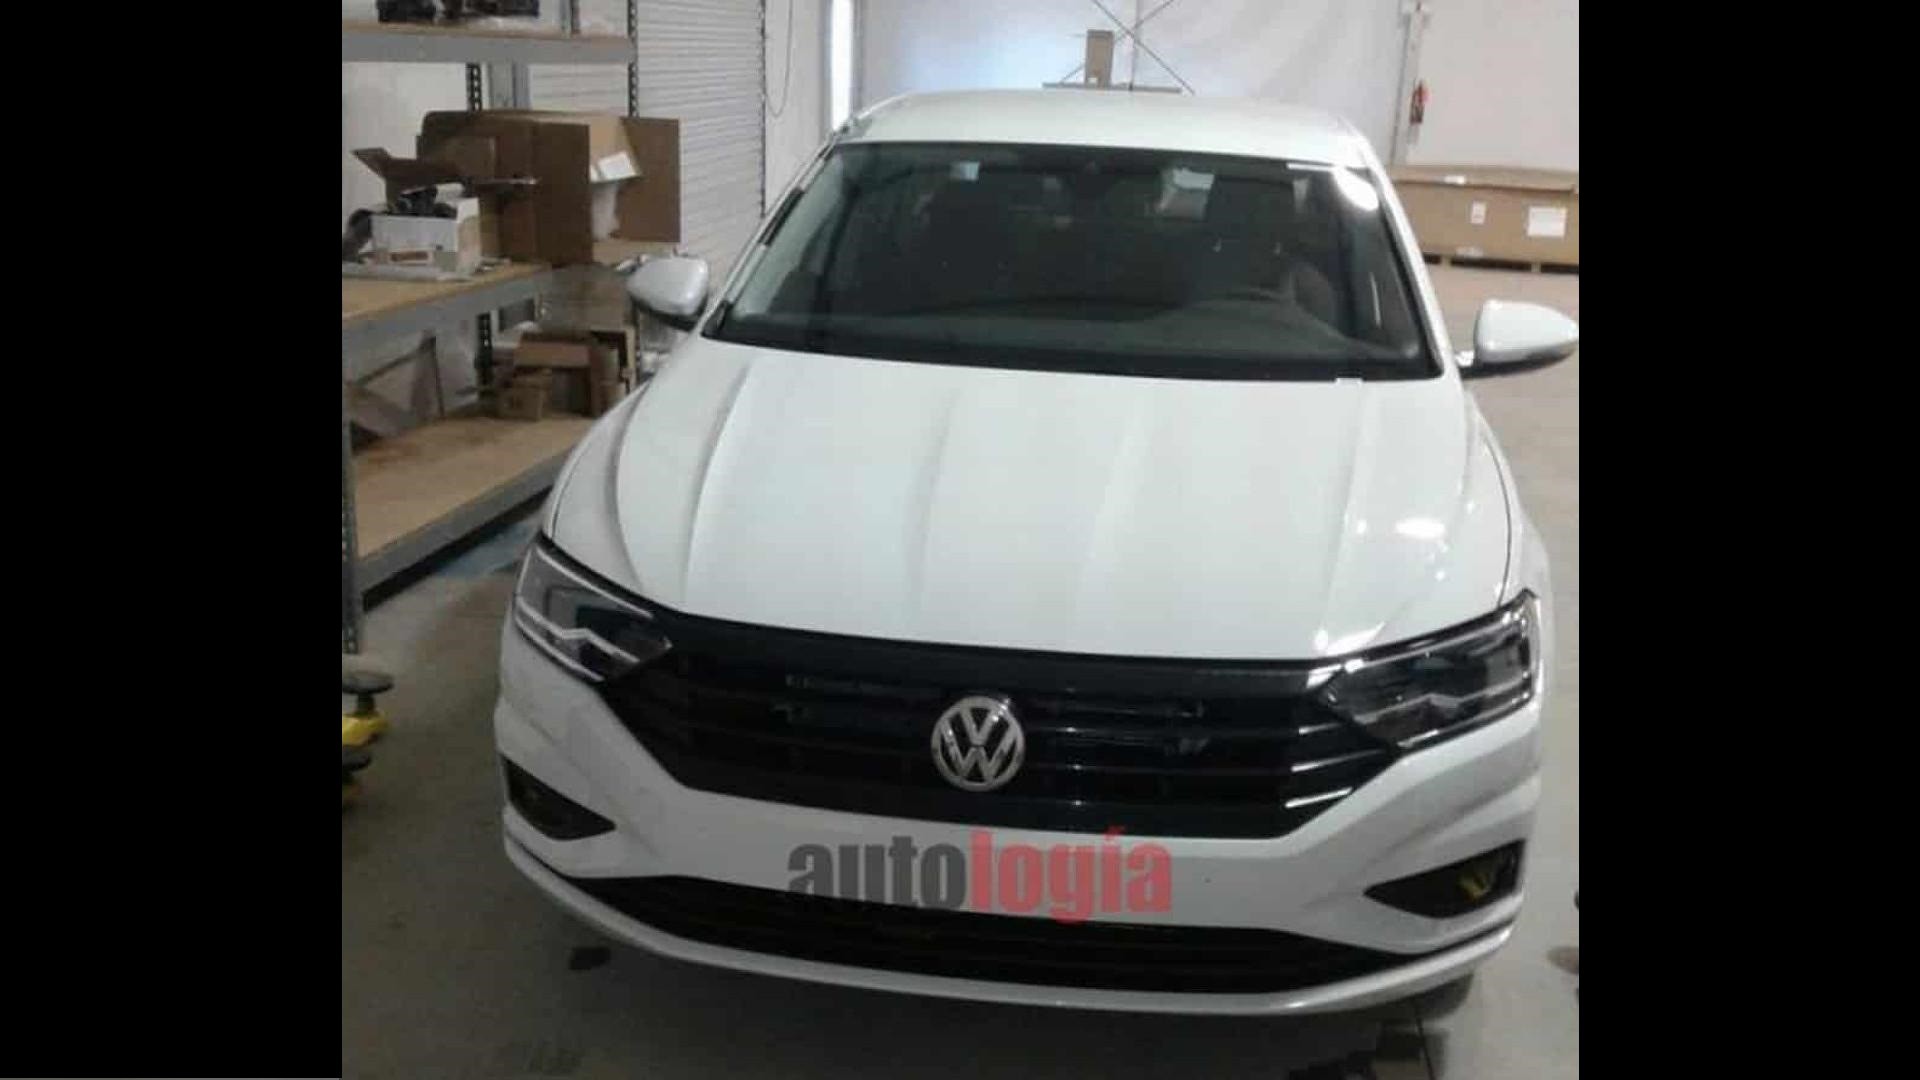 2018-volkswagen-jetta-snapped-without-camo-moves-to-mqb-platform_1.jpg